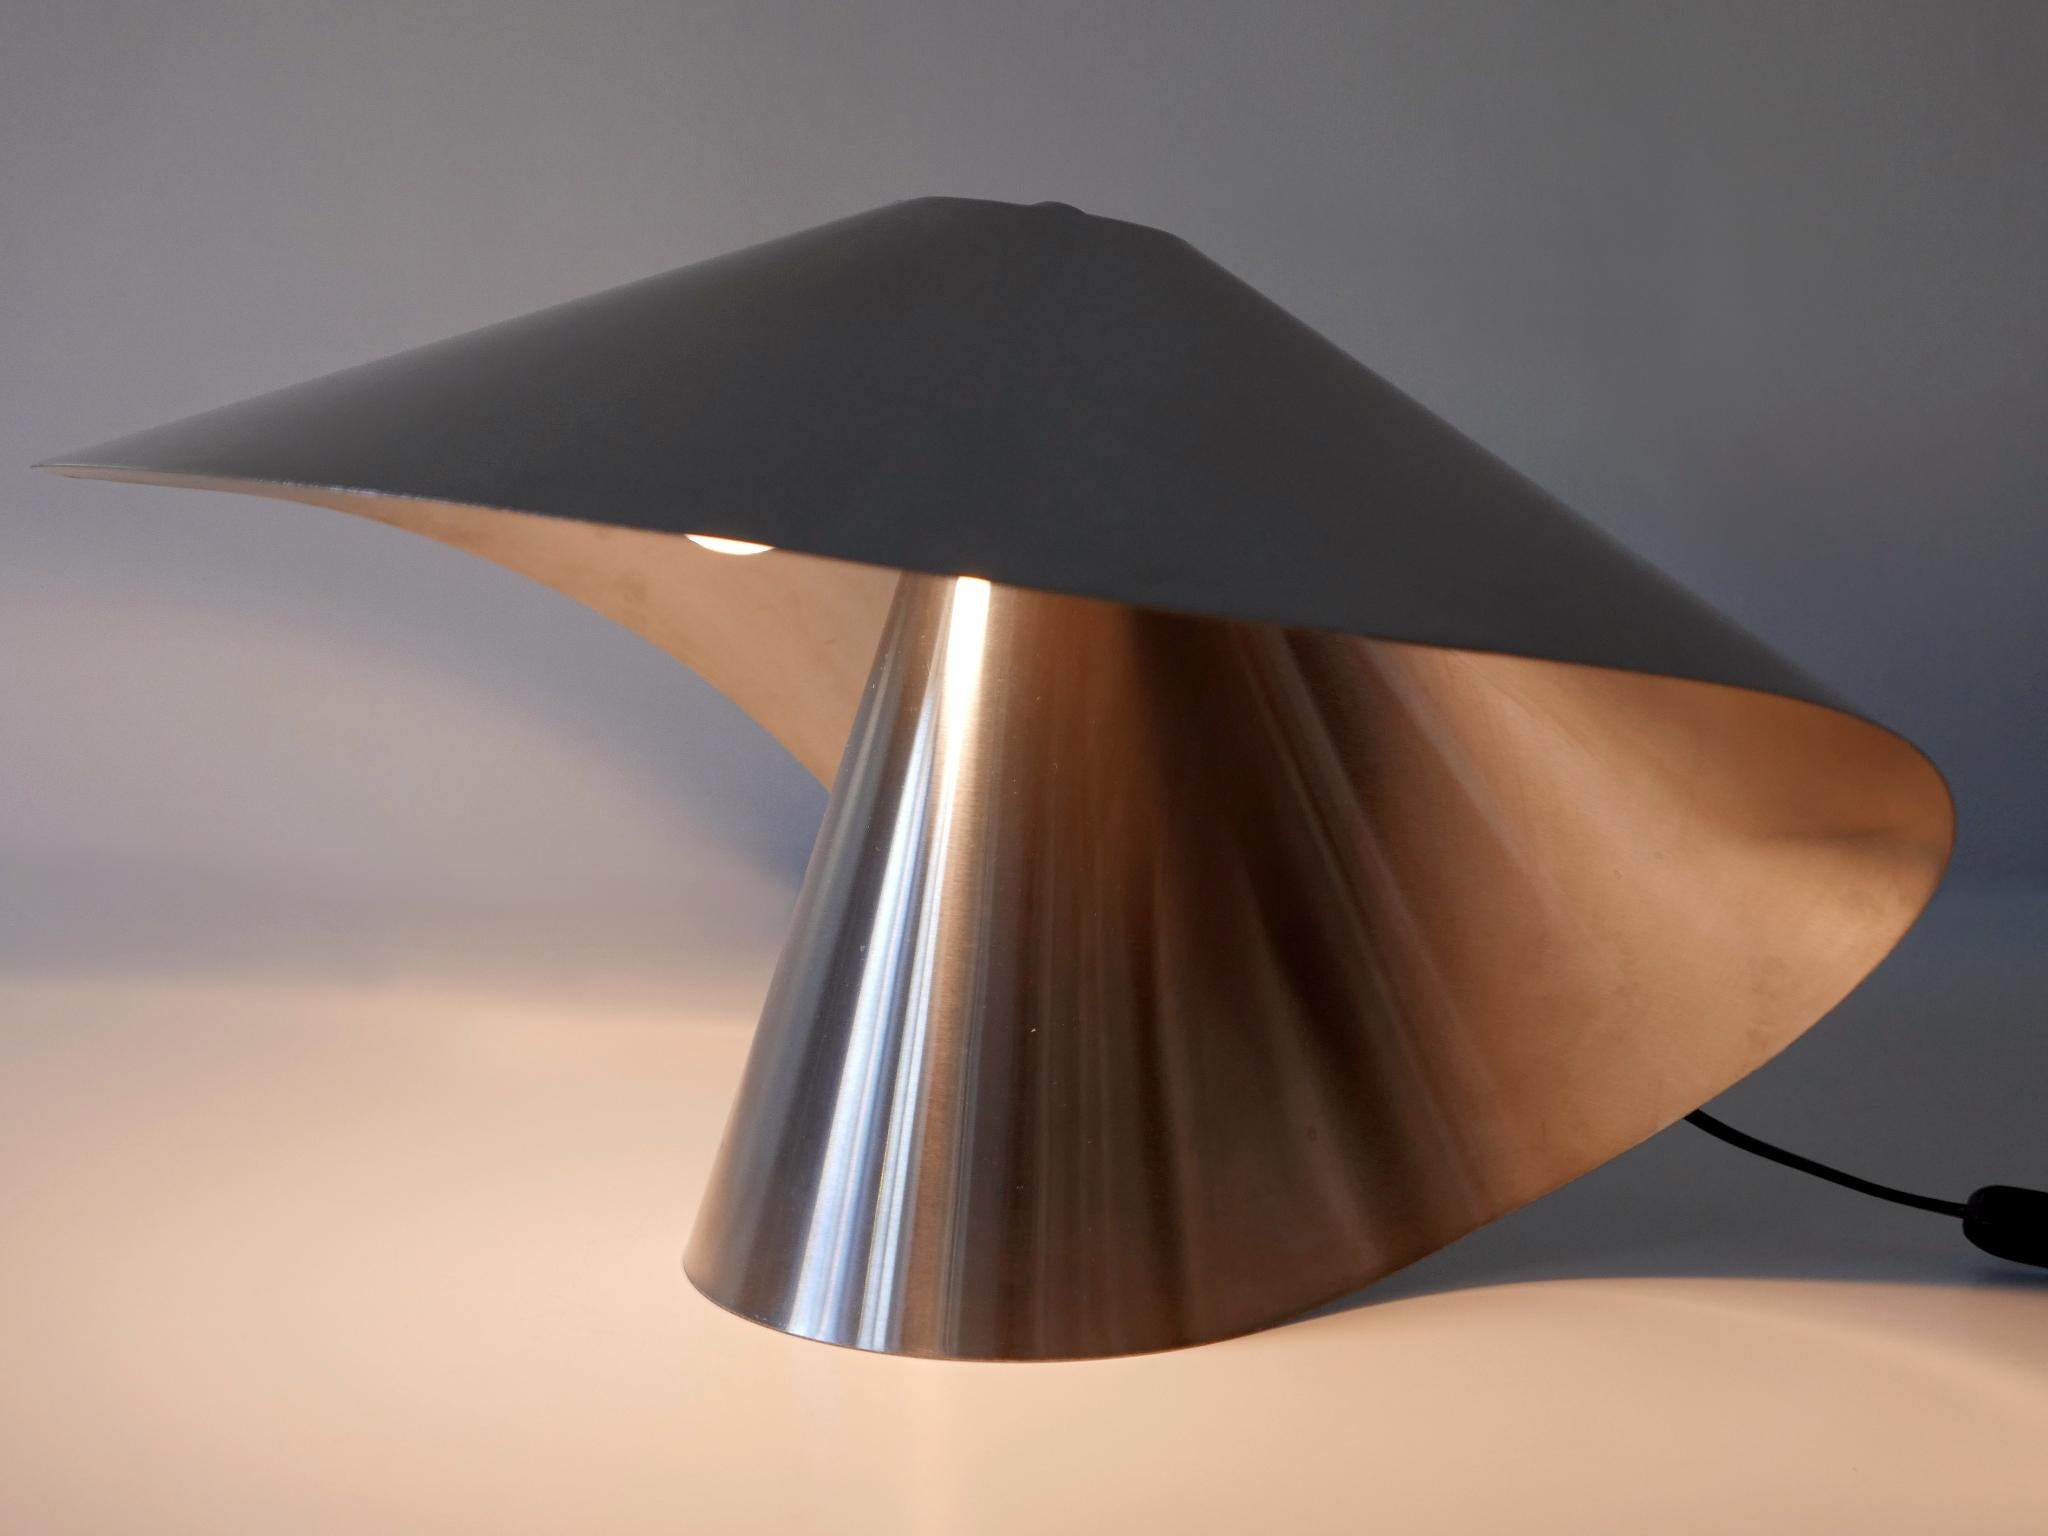 Exceptional and very elegant table lamp or light object 